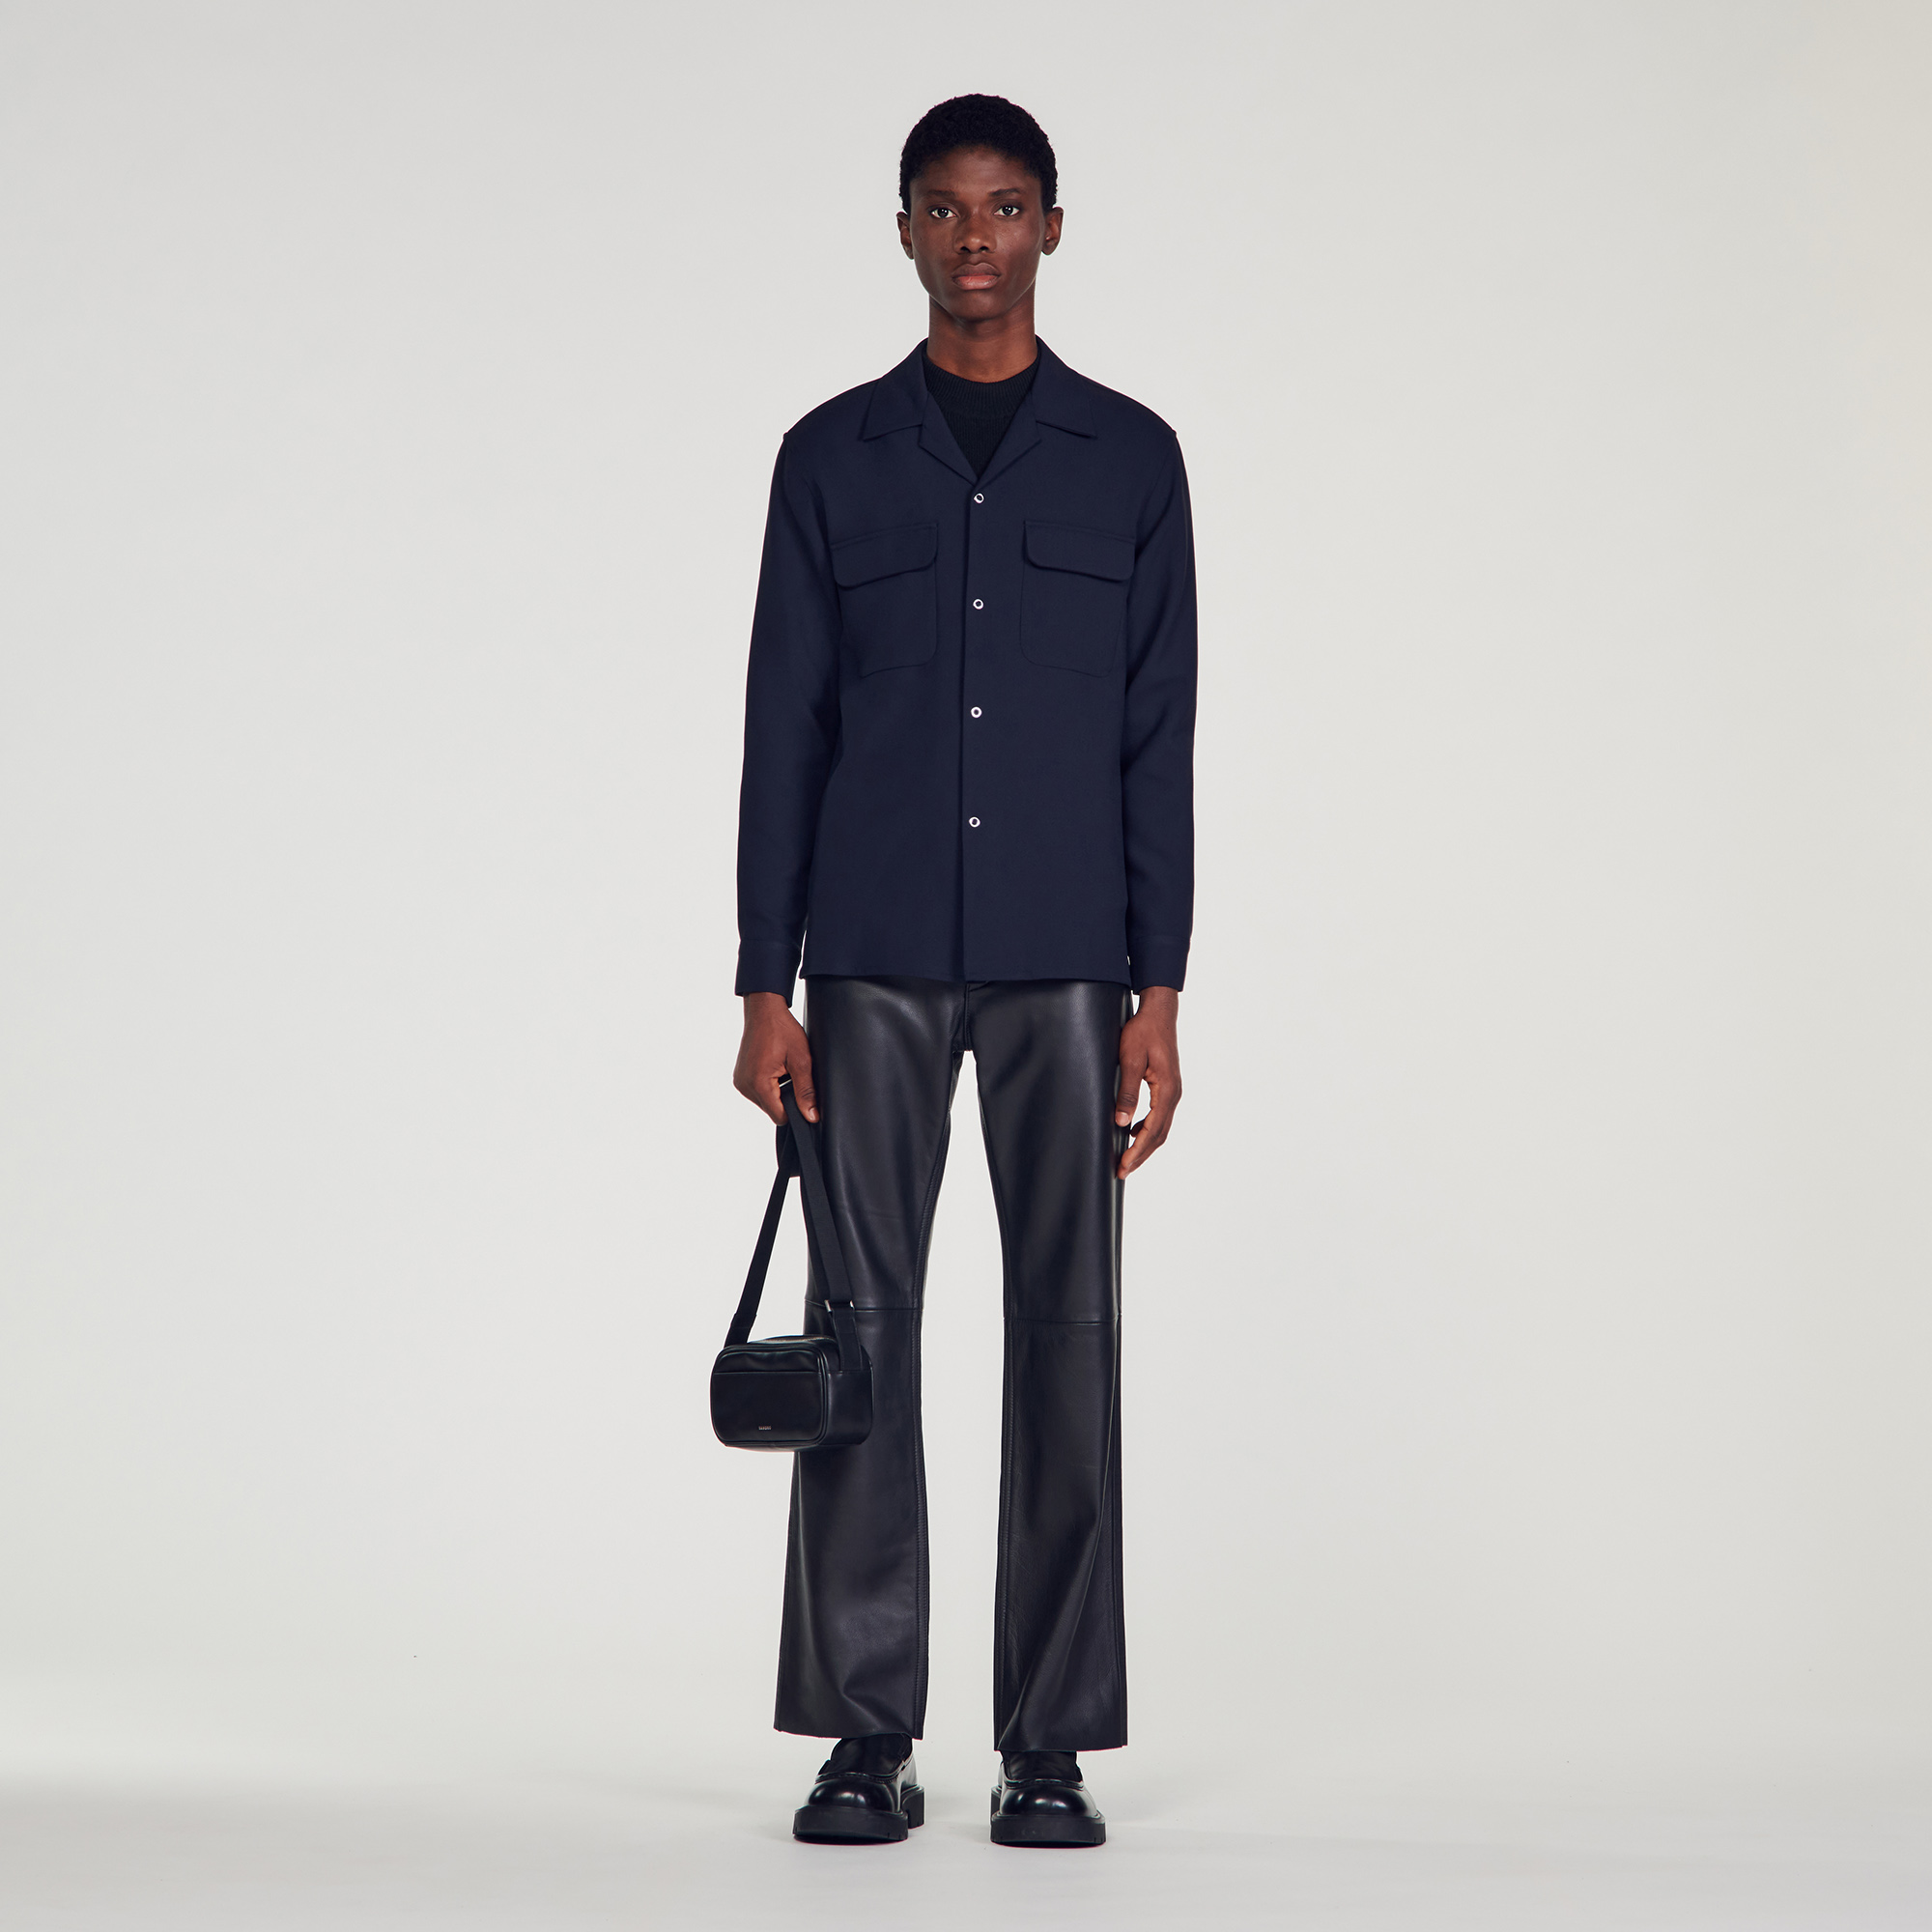 Sandro polyester Oversized shirt featuring a shark collar and long sleeves with buttoned cuffs, a button fastening and two patch pockets on the chest